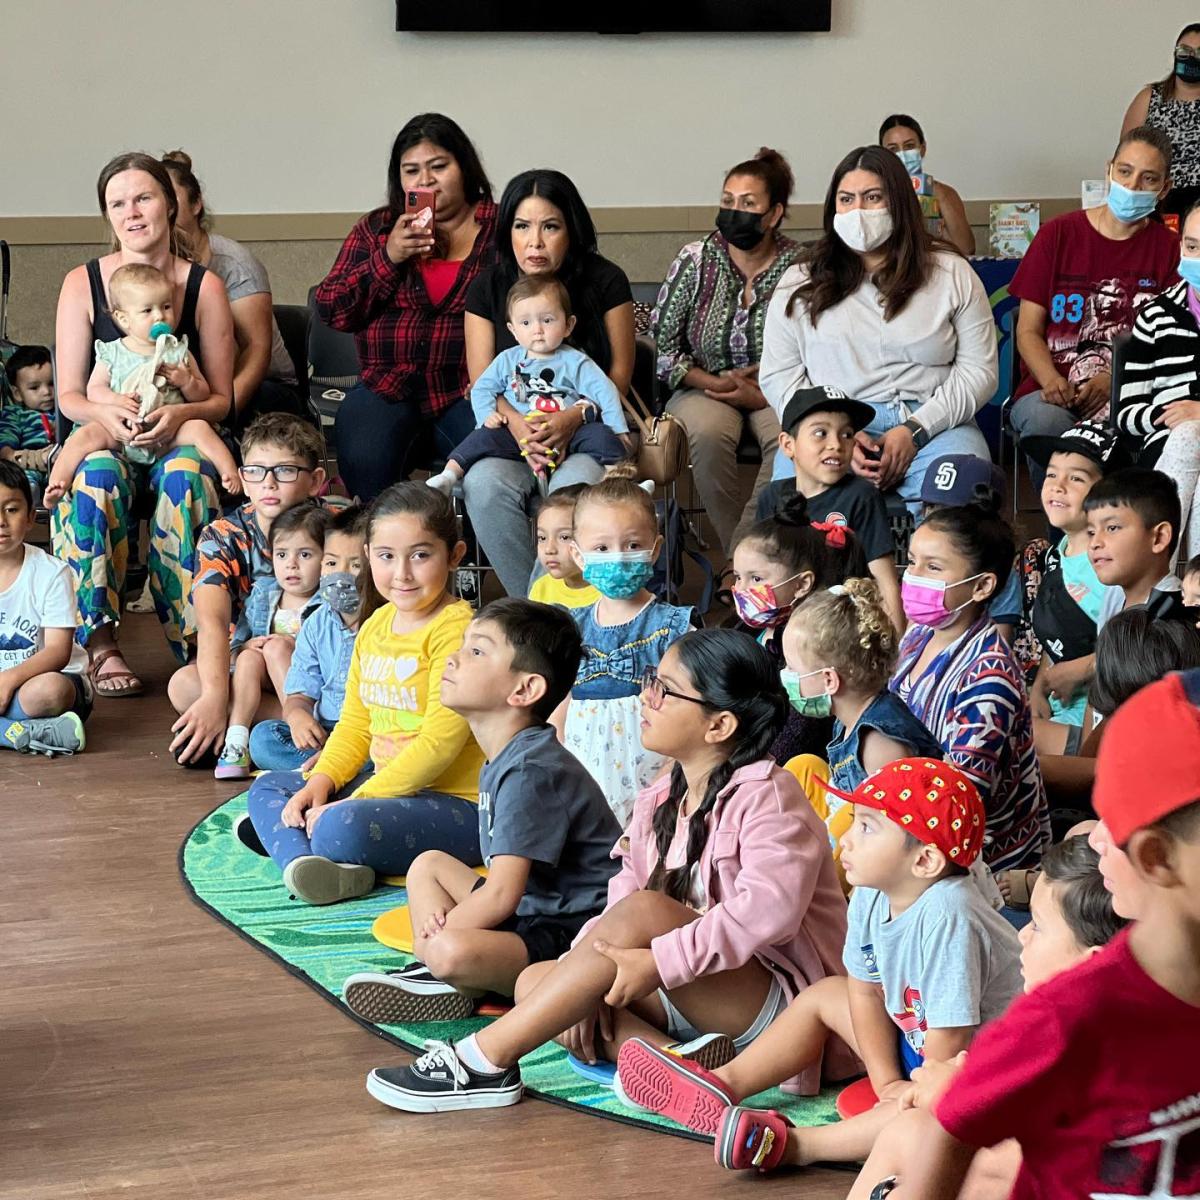 Image of people, kids and adults, with masks sitting on the floor listening